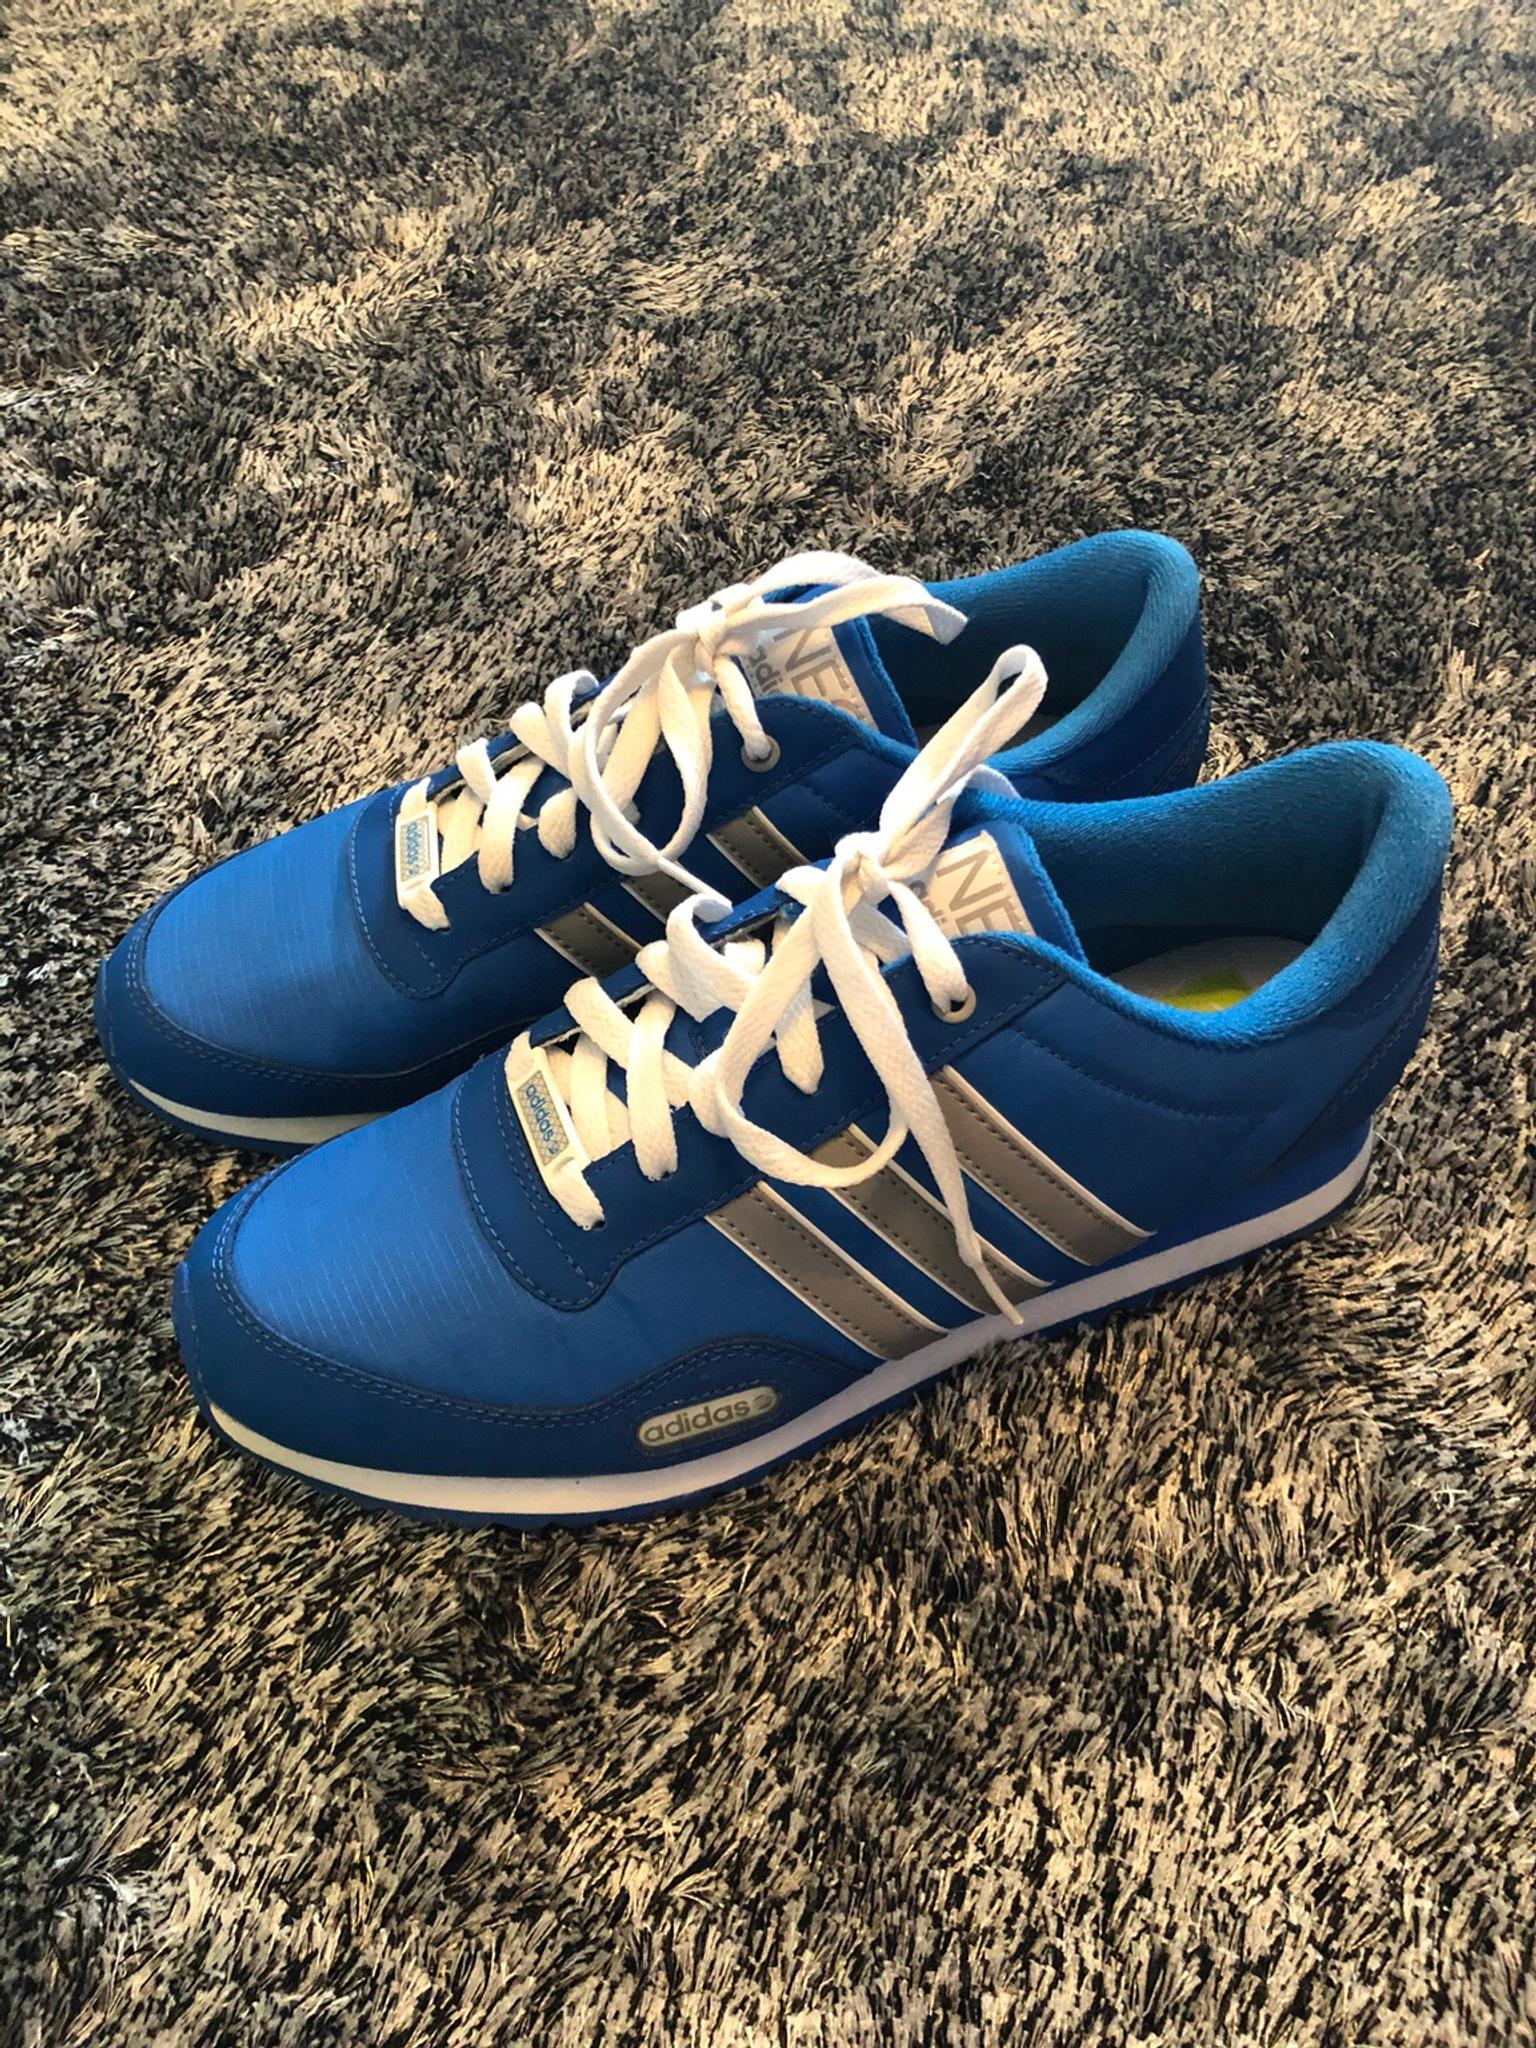 blue adidas neo trainers